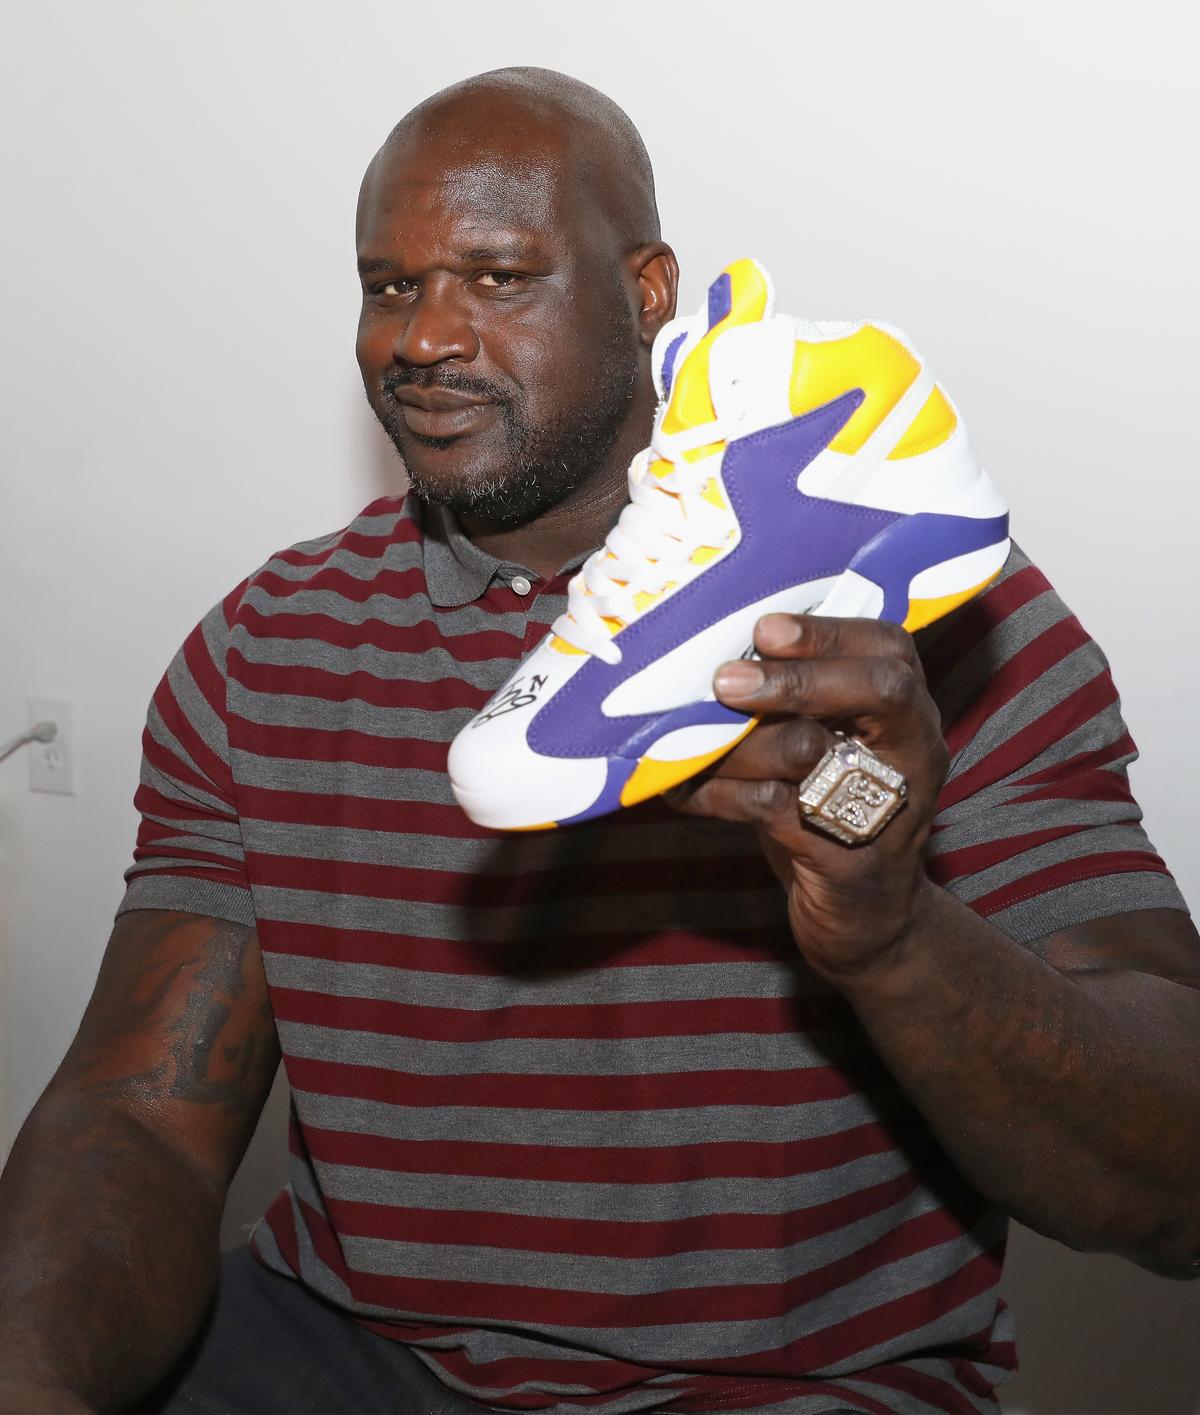 Reebok Classic and Shaquille O'Neal launch the new Shaq Attaq x Sneaker Politics shoe on Feb. 18, 2017 in New Orleans, Louisiana. (©Getty Images | <a href="https://www.gettyimages.com/detail/news-photo/reebok-classic-and-shaquille-oneal-launch-the-new-shaq-news-photo/642706236?adppopup=true">Josh Brasted</a>)